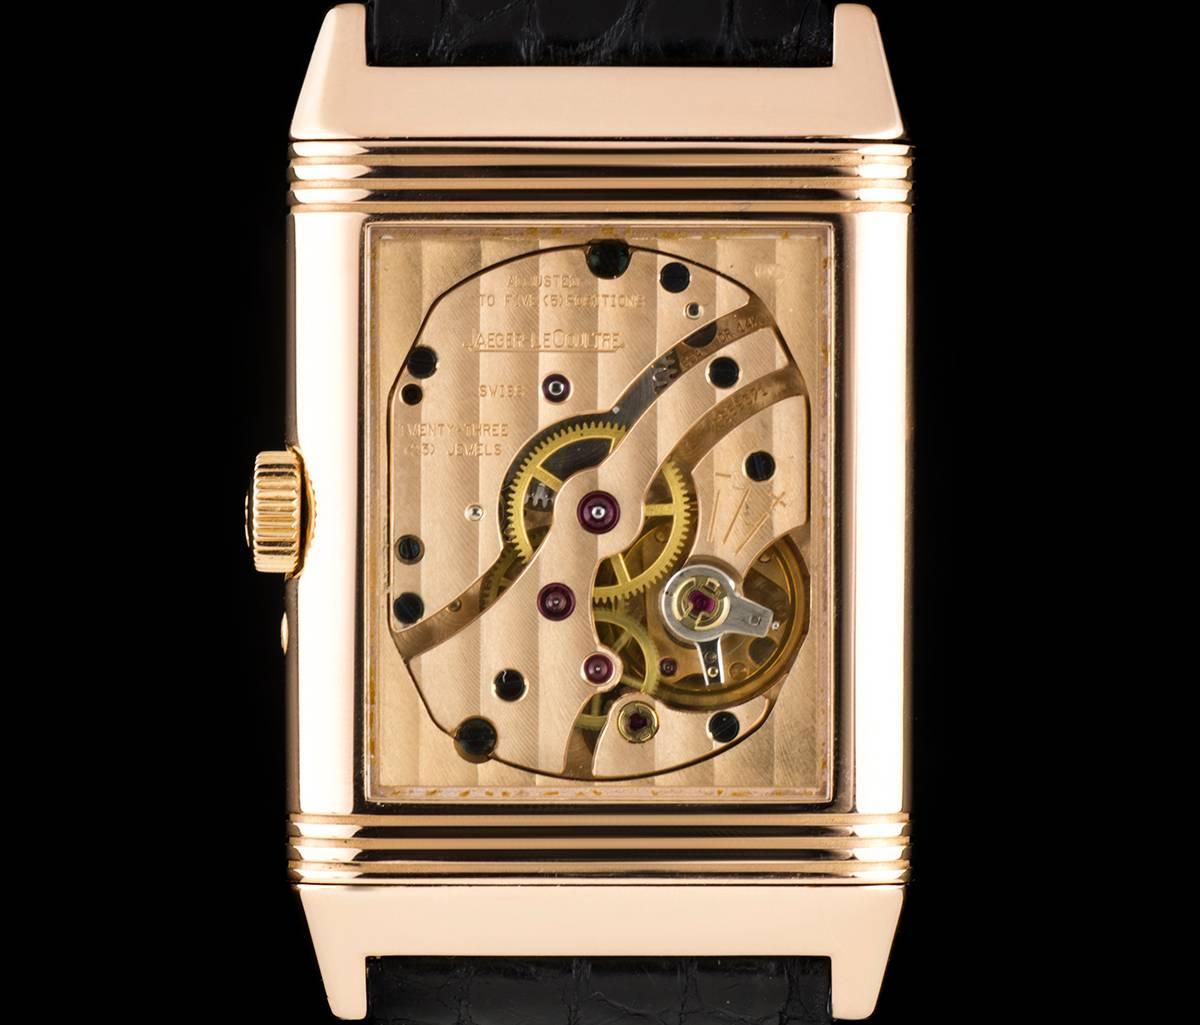 An 18k Rose Gold 60th Anniversary Reverso Gents Wristwatch, silver dial with arabic numbers, date indicator on inner edge of dial, small seconds at 6 0'clock, power reserve display between 10 and 11 0'clock, a fixed 18k rose gold bezel, a black